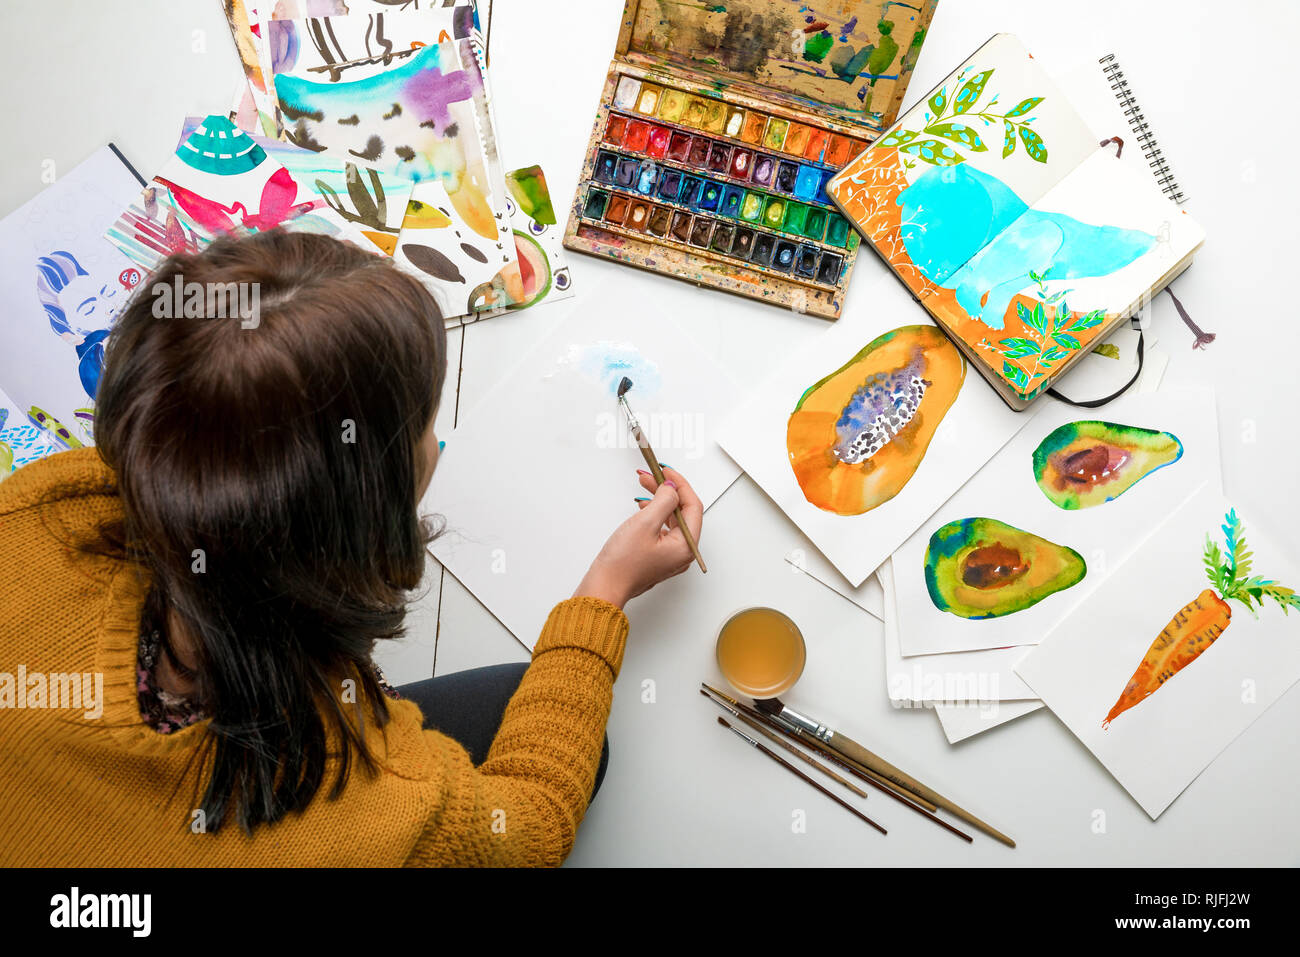 https://c8.alamy.com/comp/RJFJ2W/top-view-of-woman-painting-with-watercolors-paints-while-surrounded-by-color-drawings-and-drawing-utensils-RJFJ2W.jpg